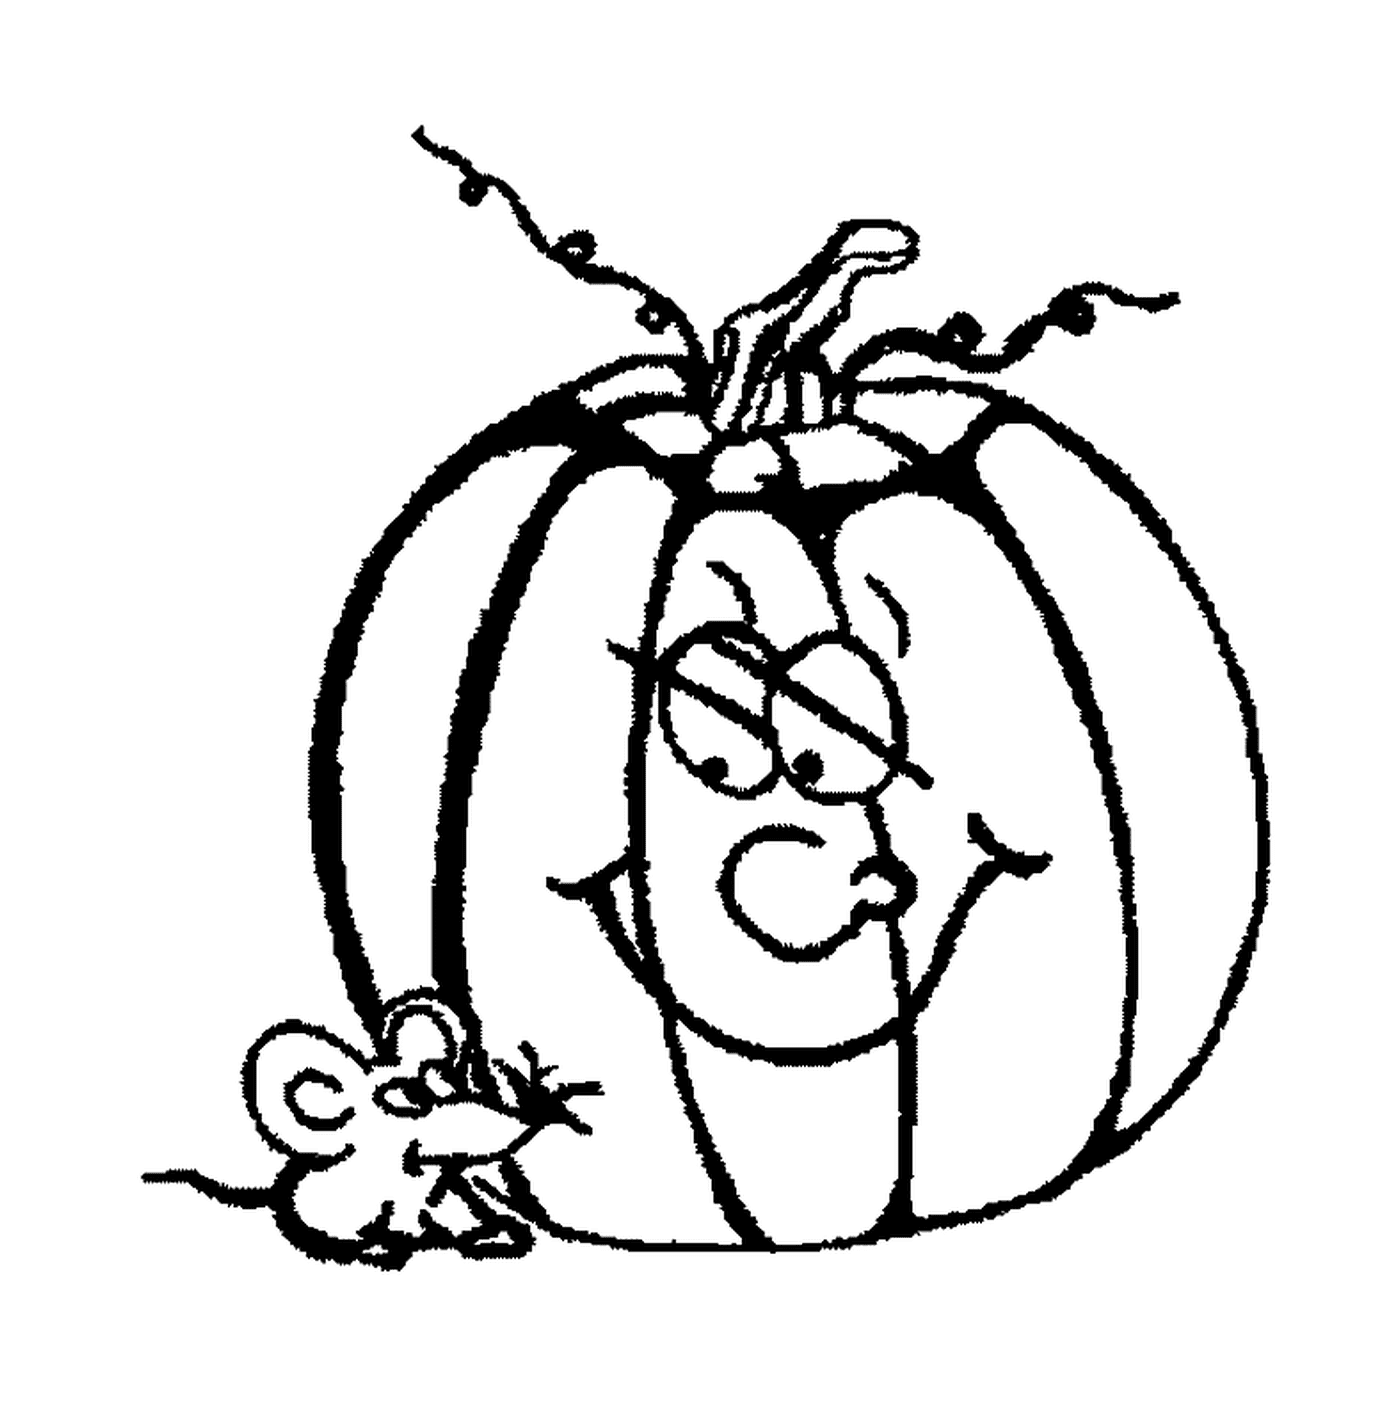  A pumpkin with a mouse 